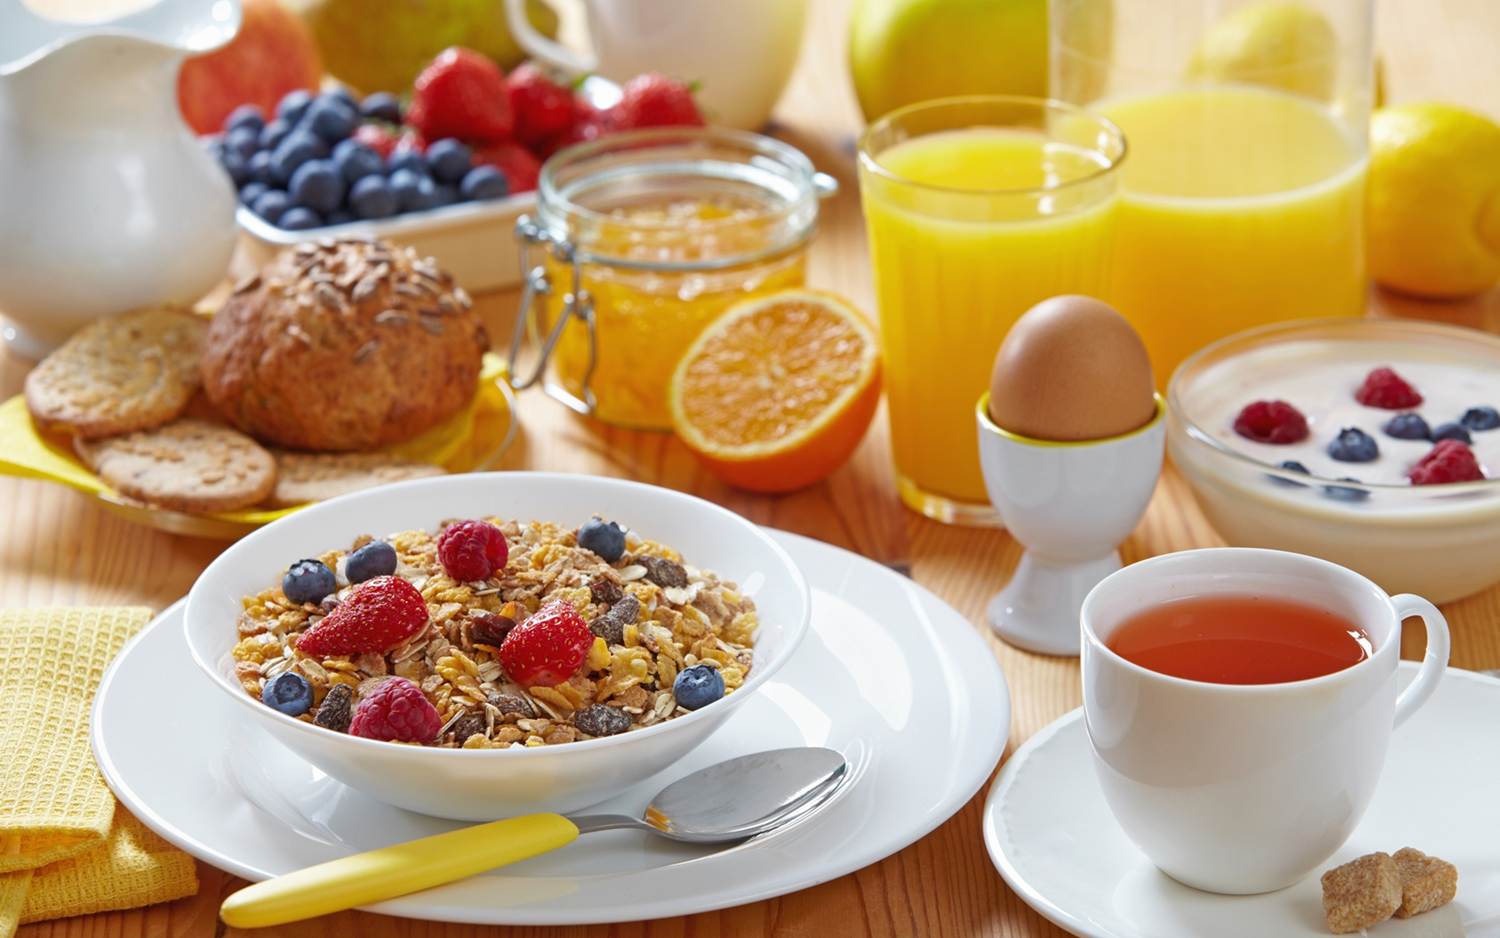 Three Benefits of Eating Breakfasts for Health